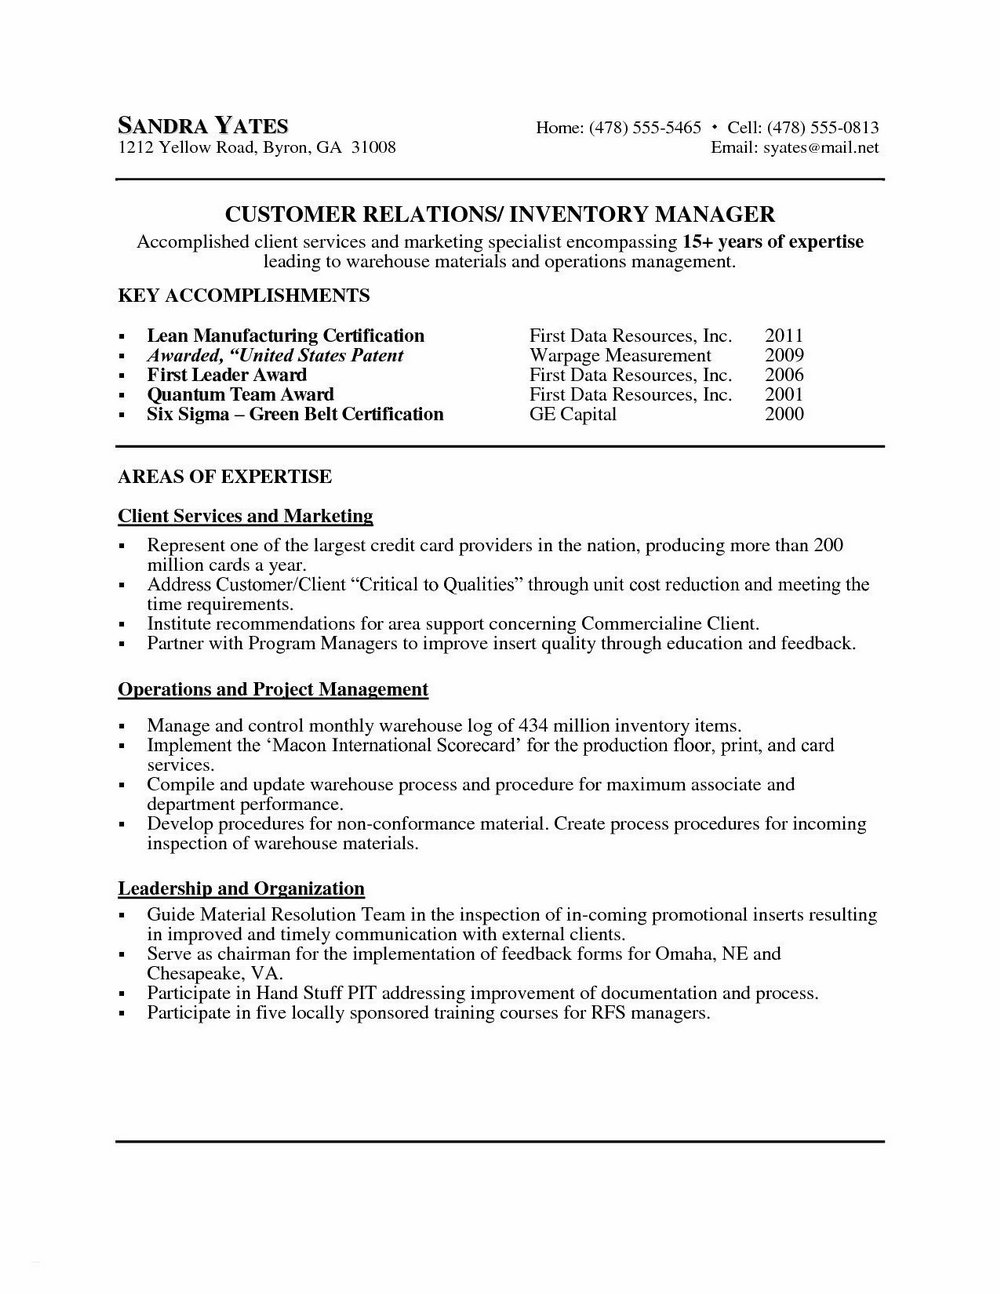 Best resume writing services military transition